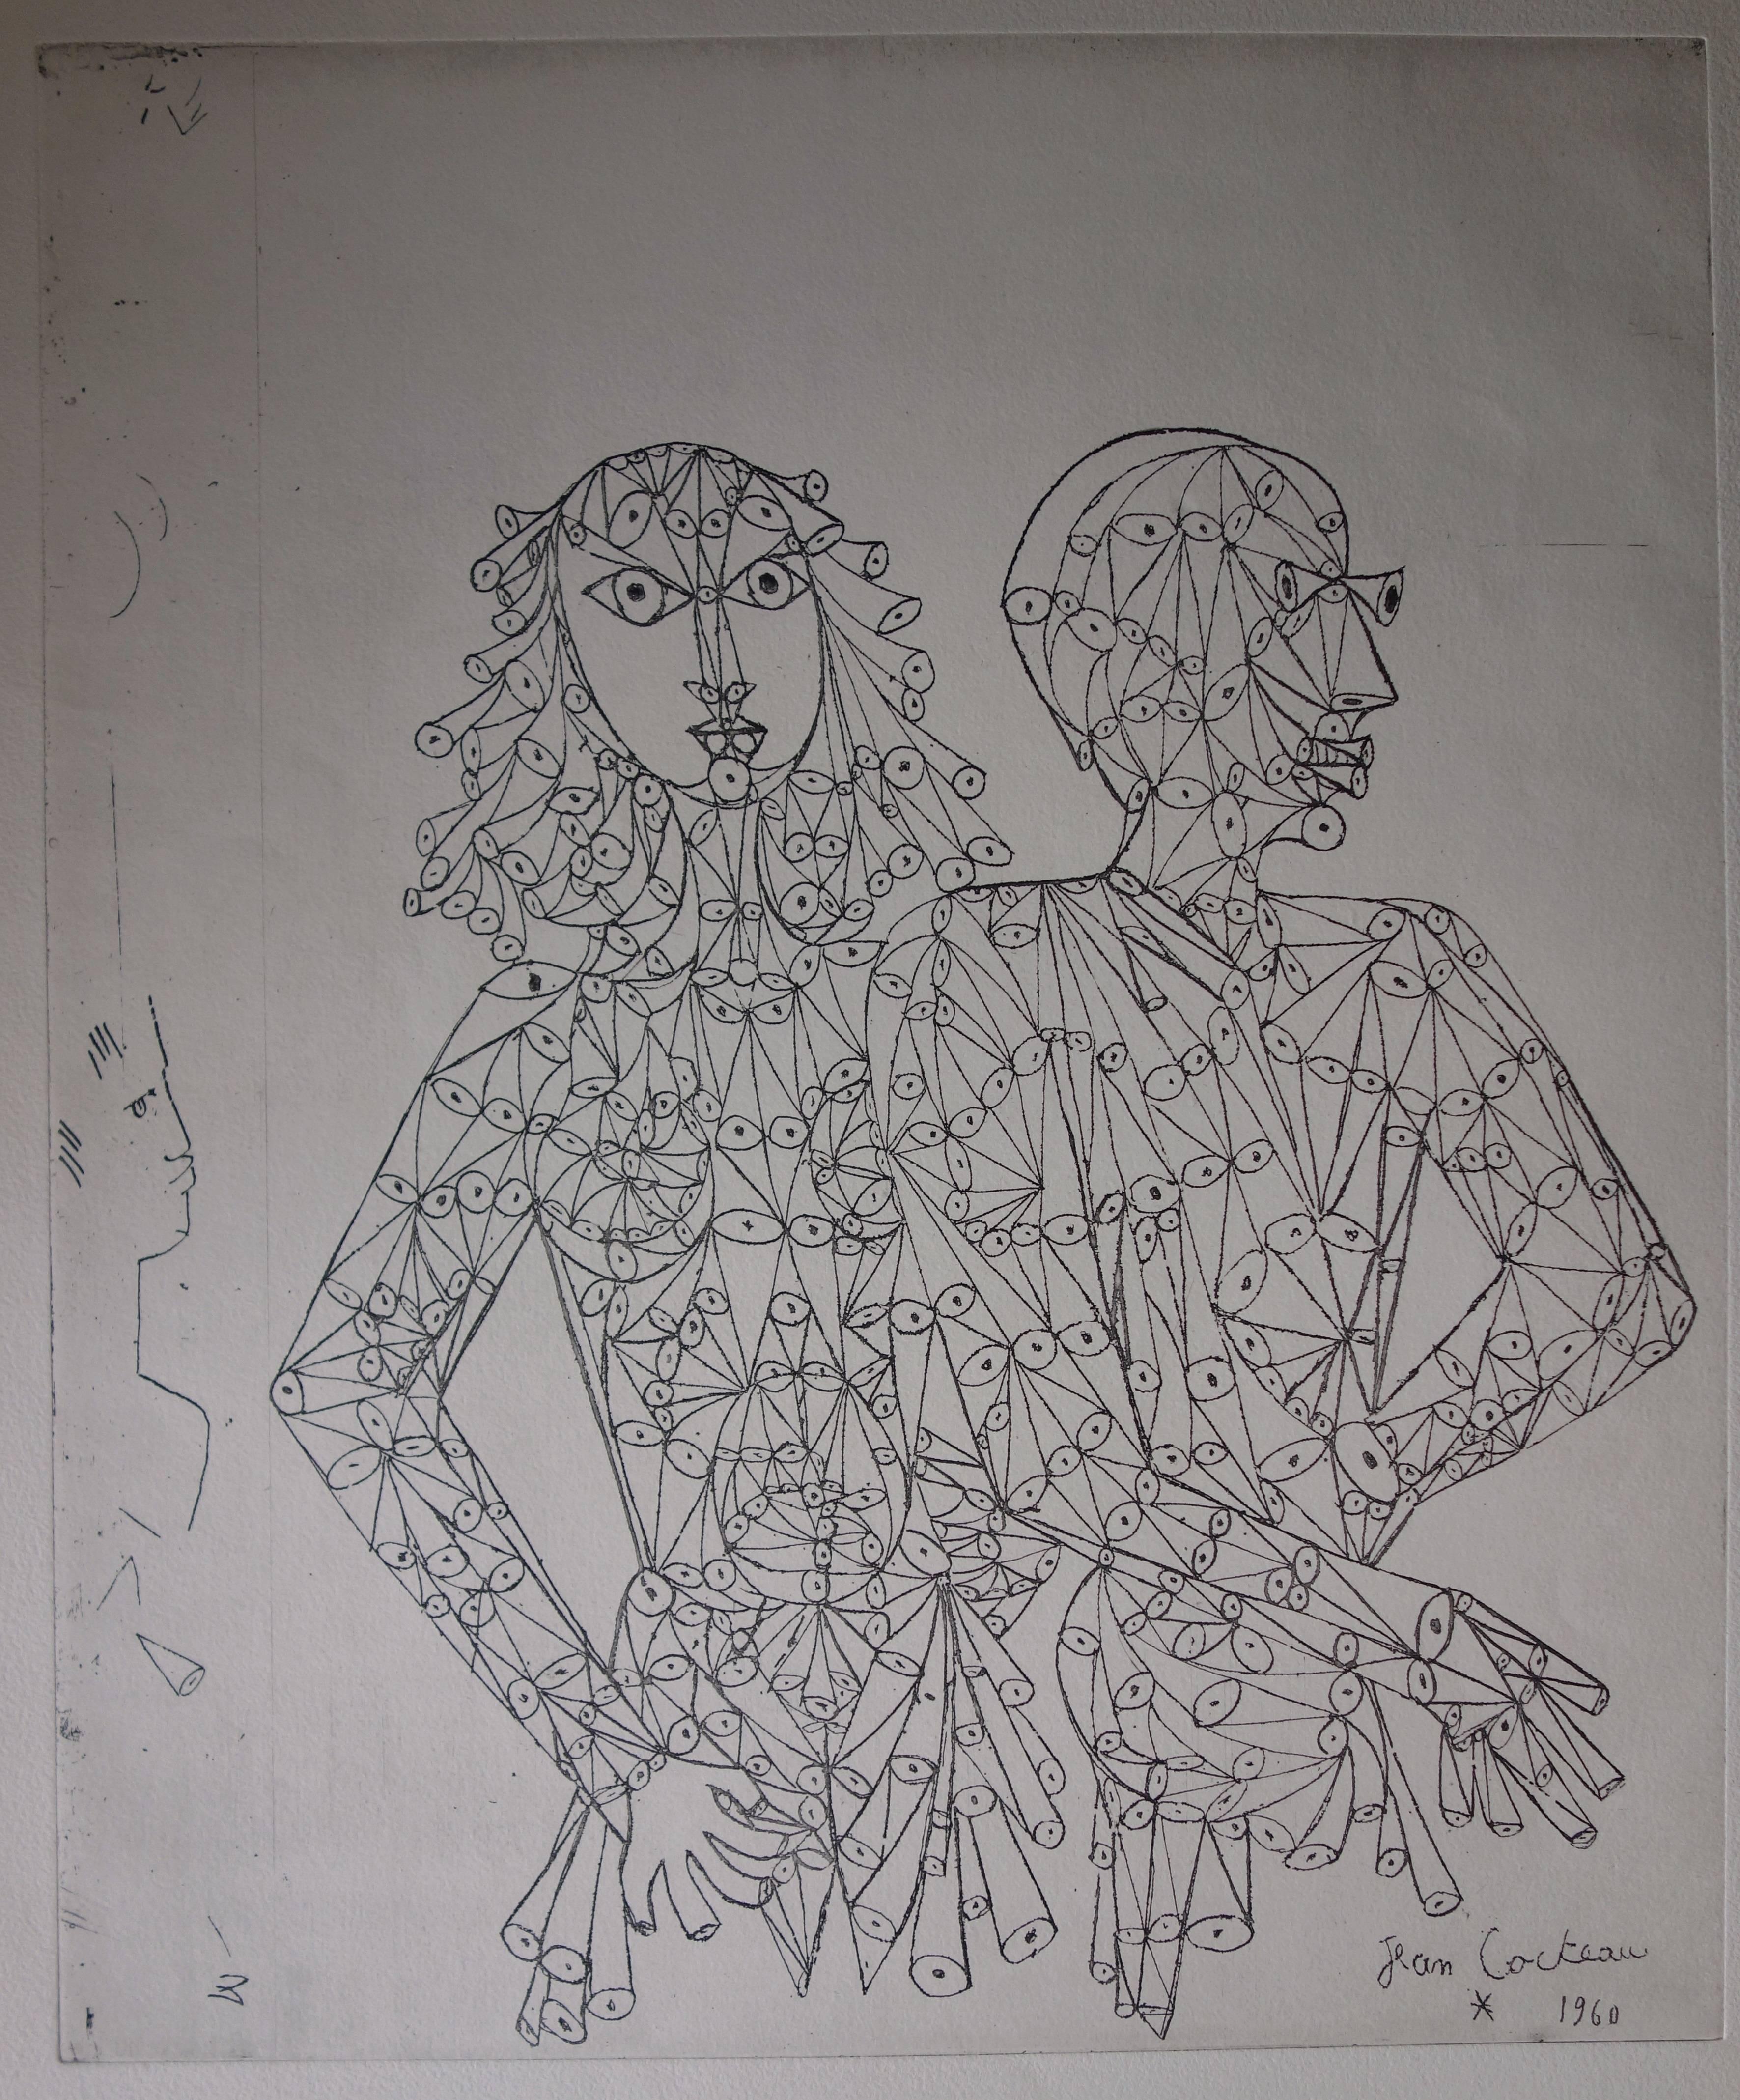 Le couple - etching (around 1960) - Print by Jean Cocteau